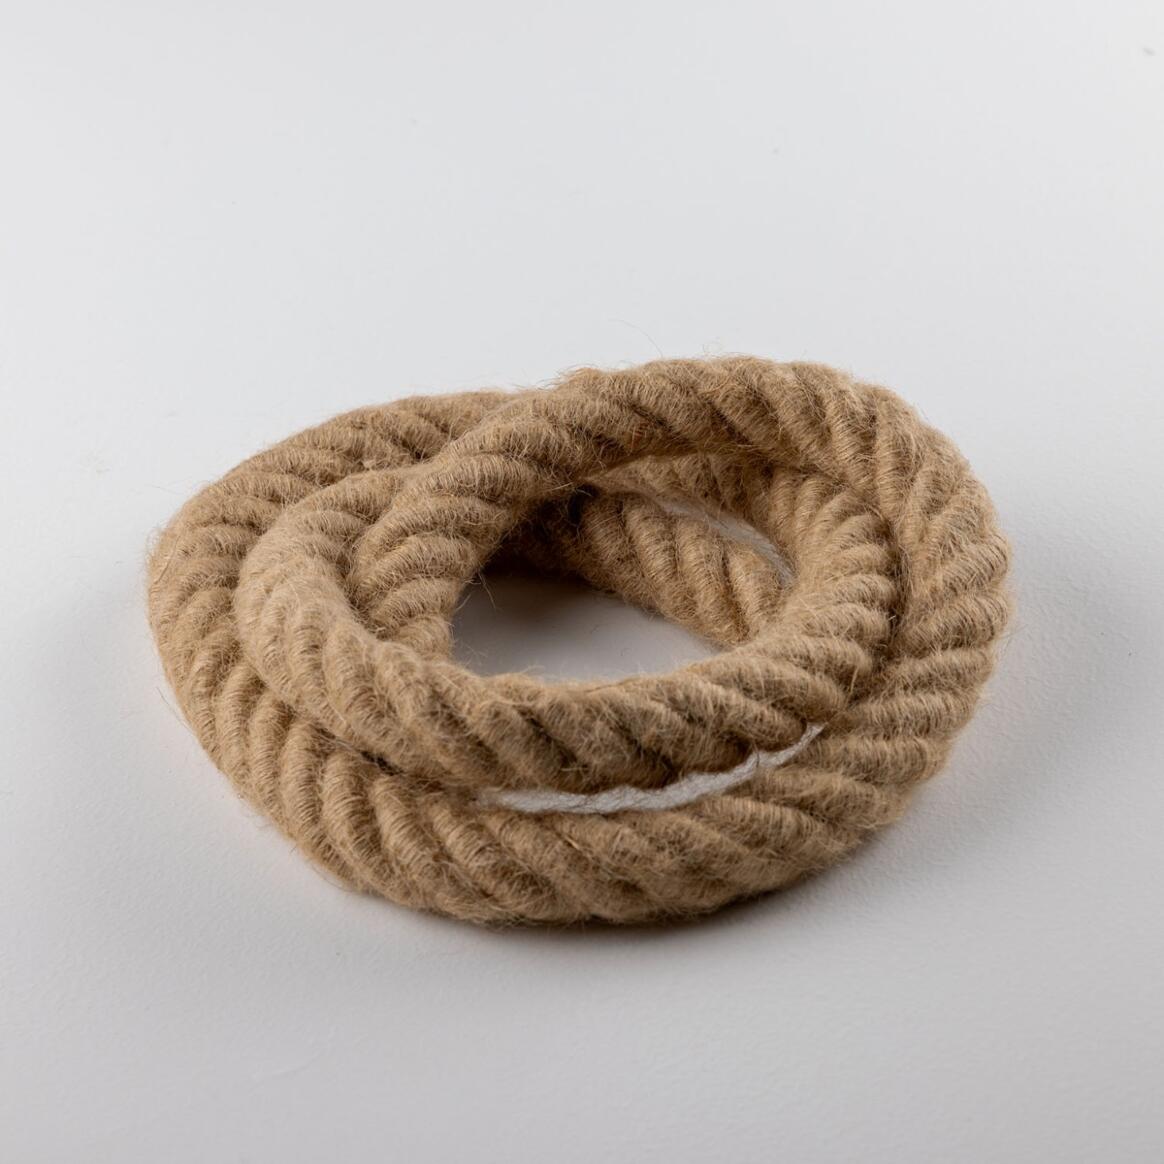 Rustic Jute Rope Cable, 3 Core main product image